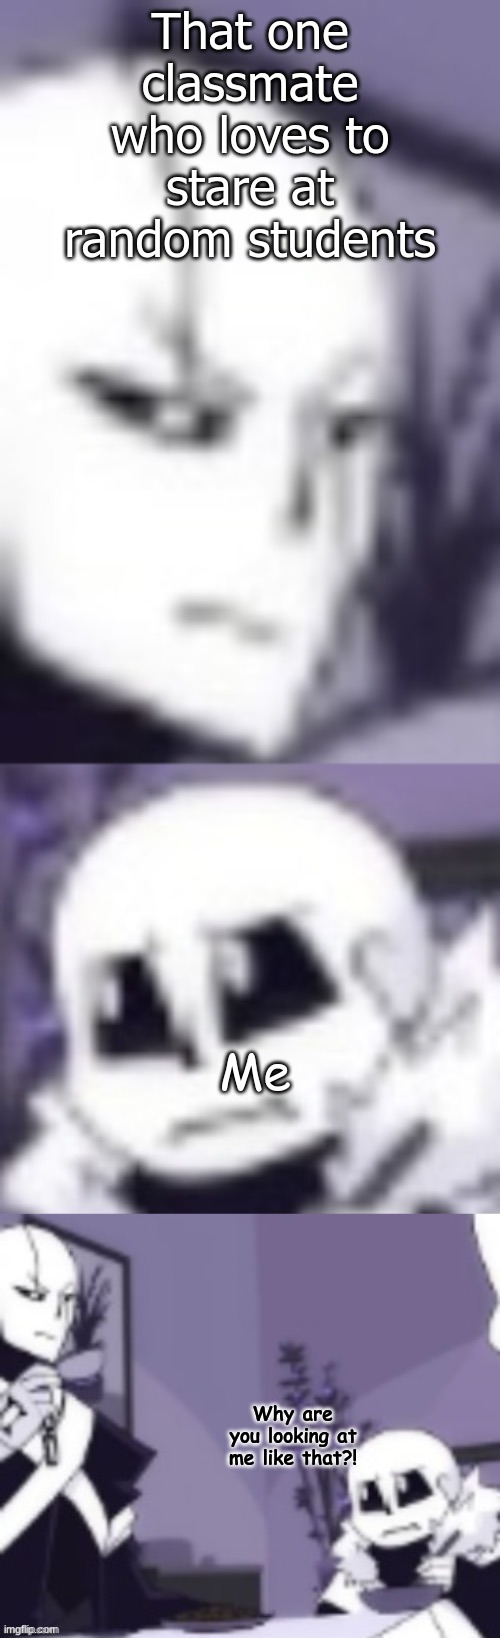 Staring always makes me feel uncomfortable | That one classmate who loves to stare at random students; Me; Why are you looking at me like that?! | image tagged in cross and x gaster looking at eachother | made w/ Imgflip meme maker